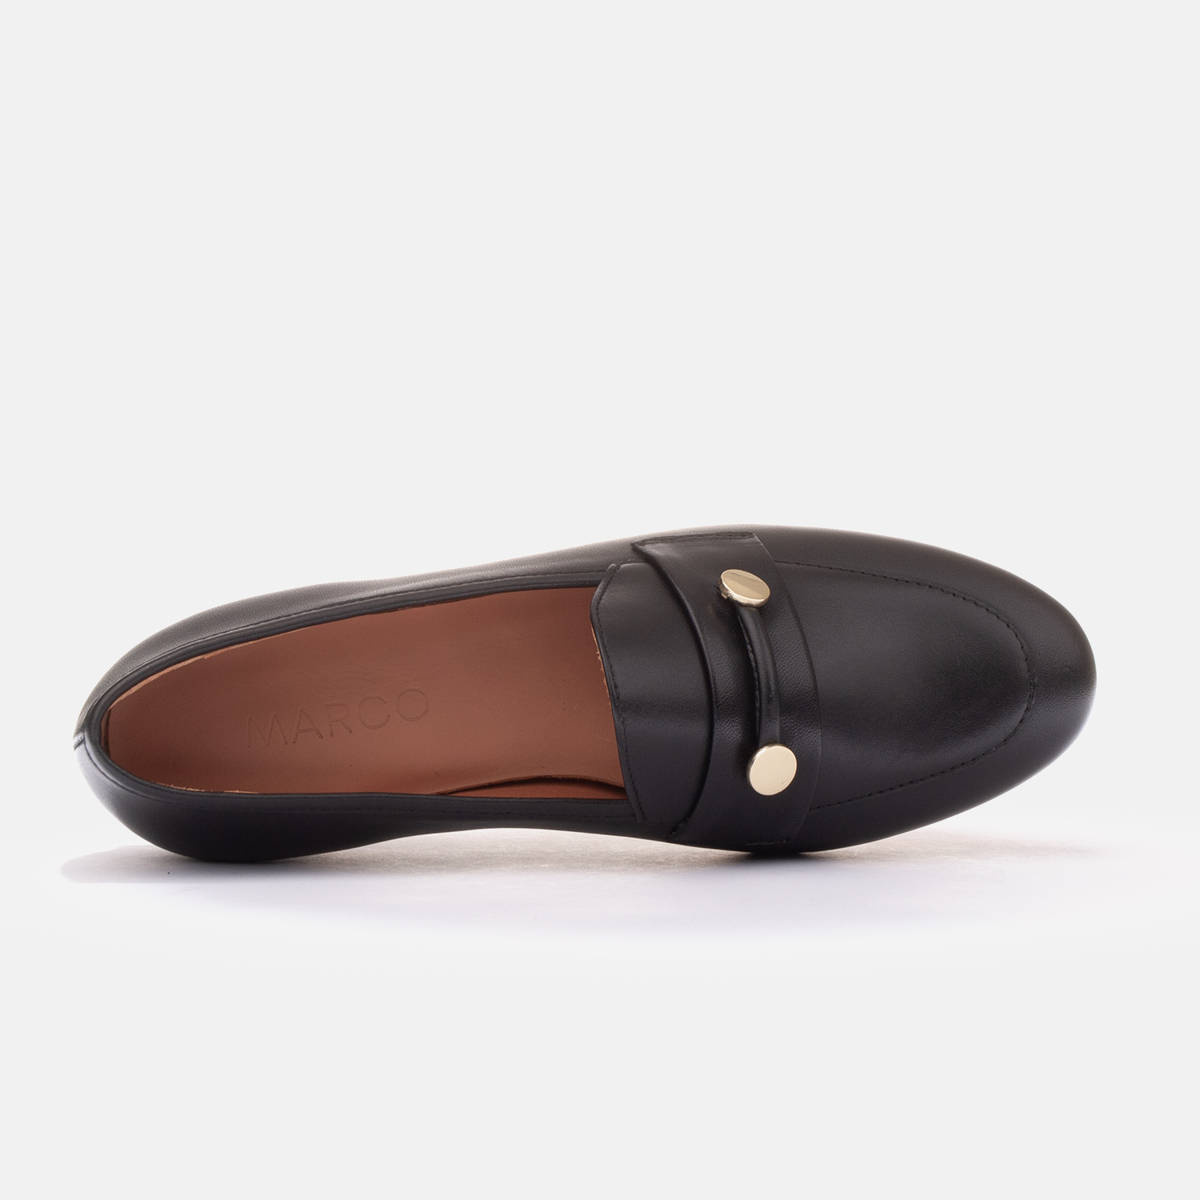 Loafers Pingle